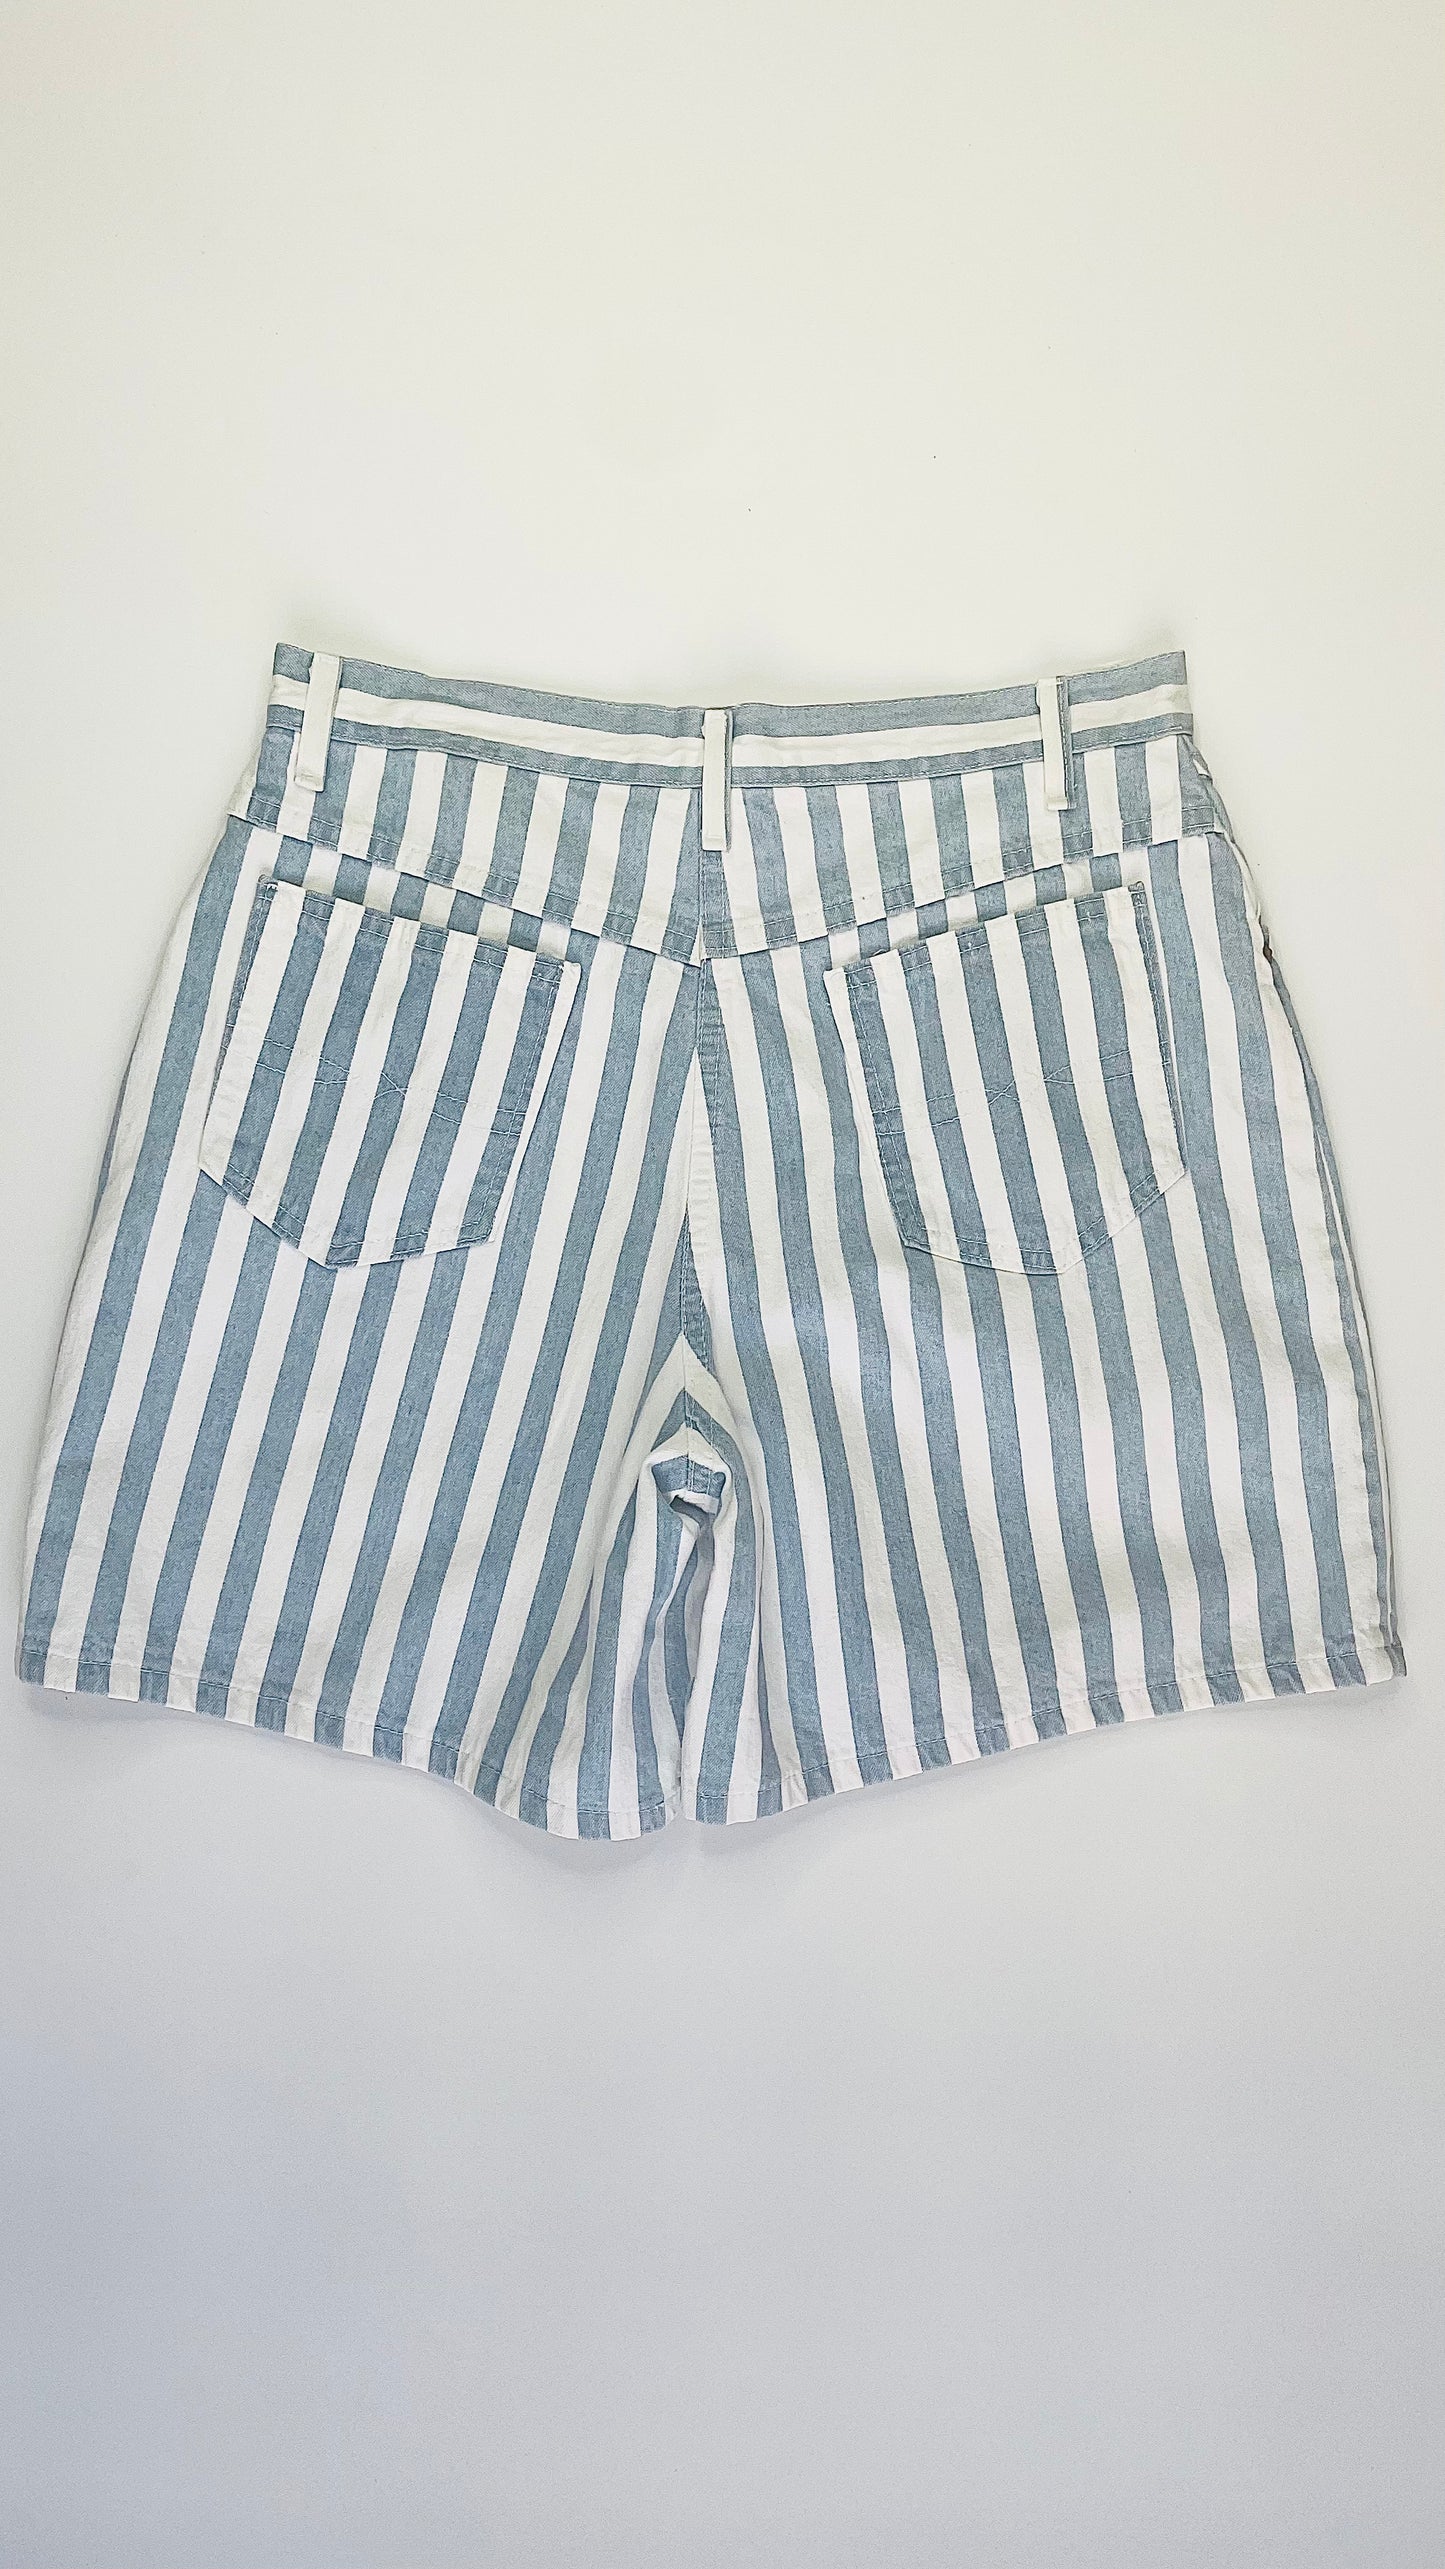 Vintage 90s Faded Glory blue and white striped denim shorts - Size 14